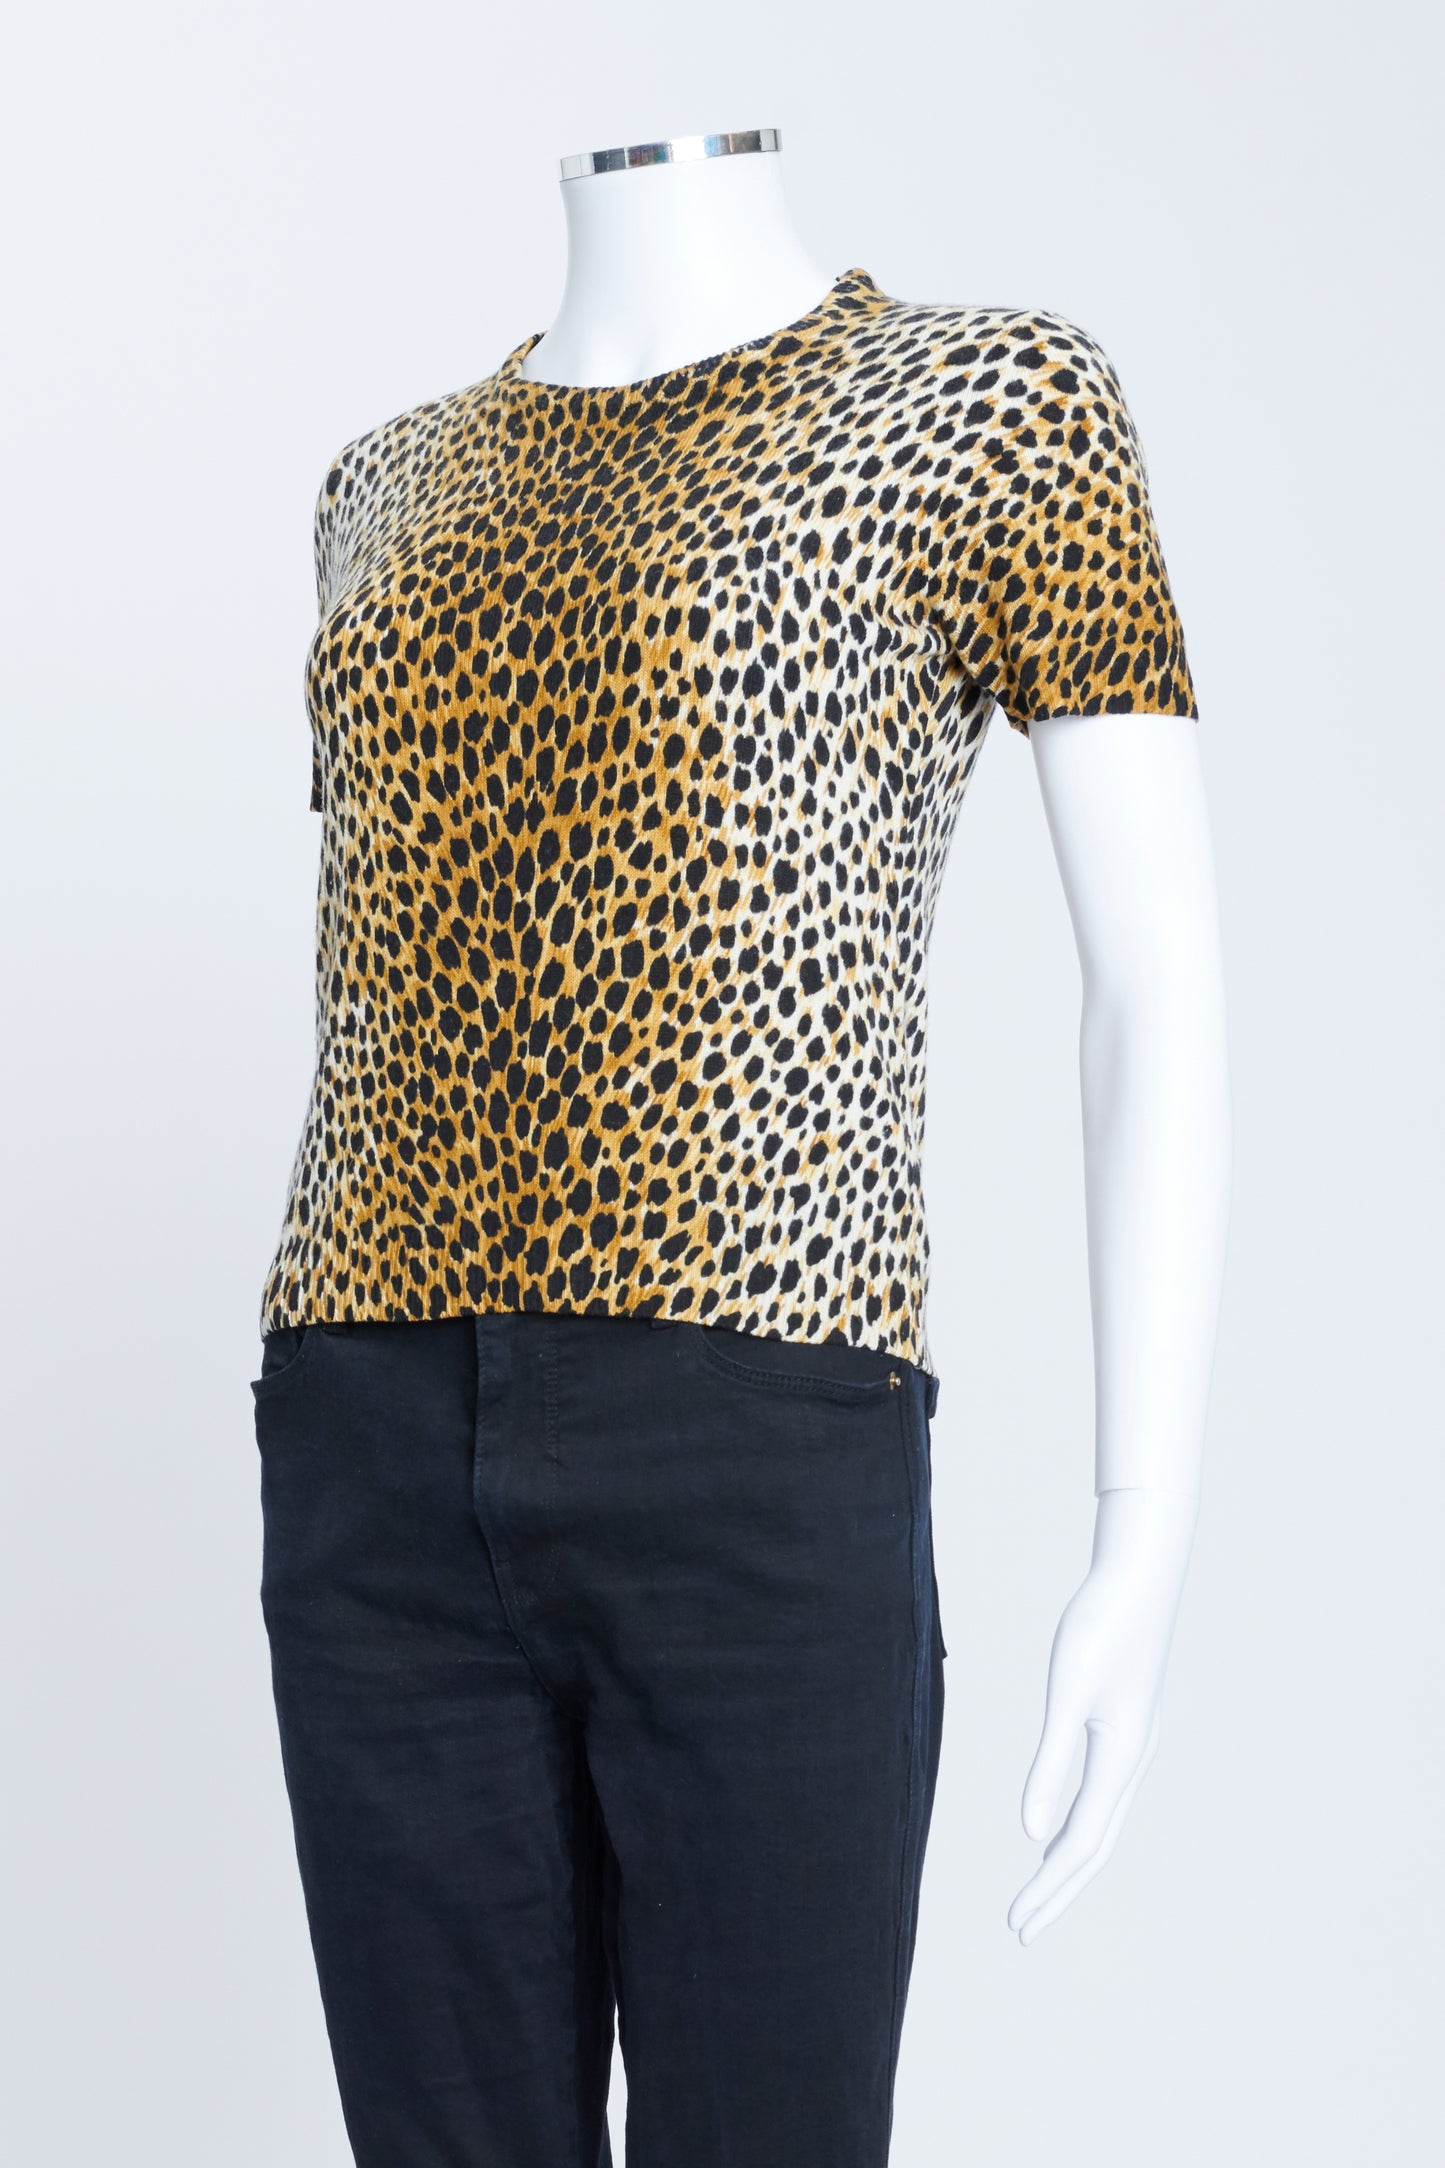 Leopard Print Short Sleeve Knitted Sweater